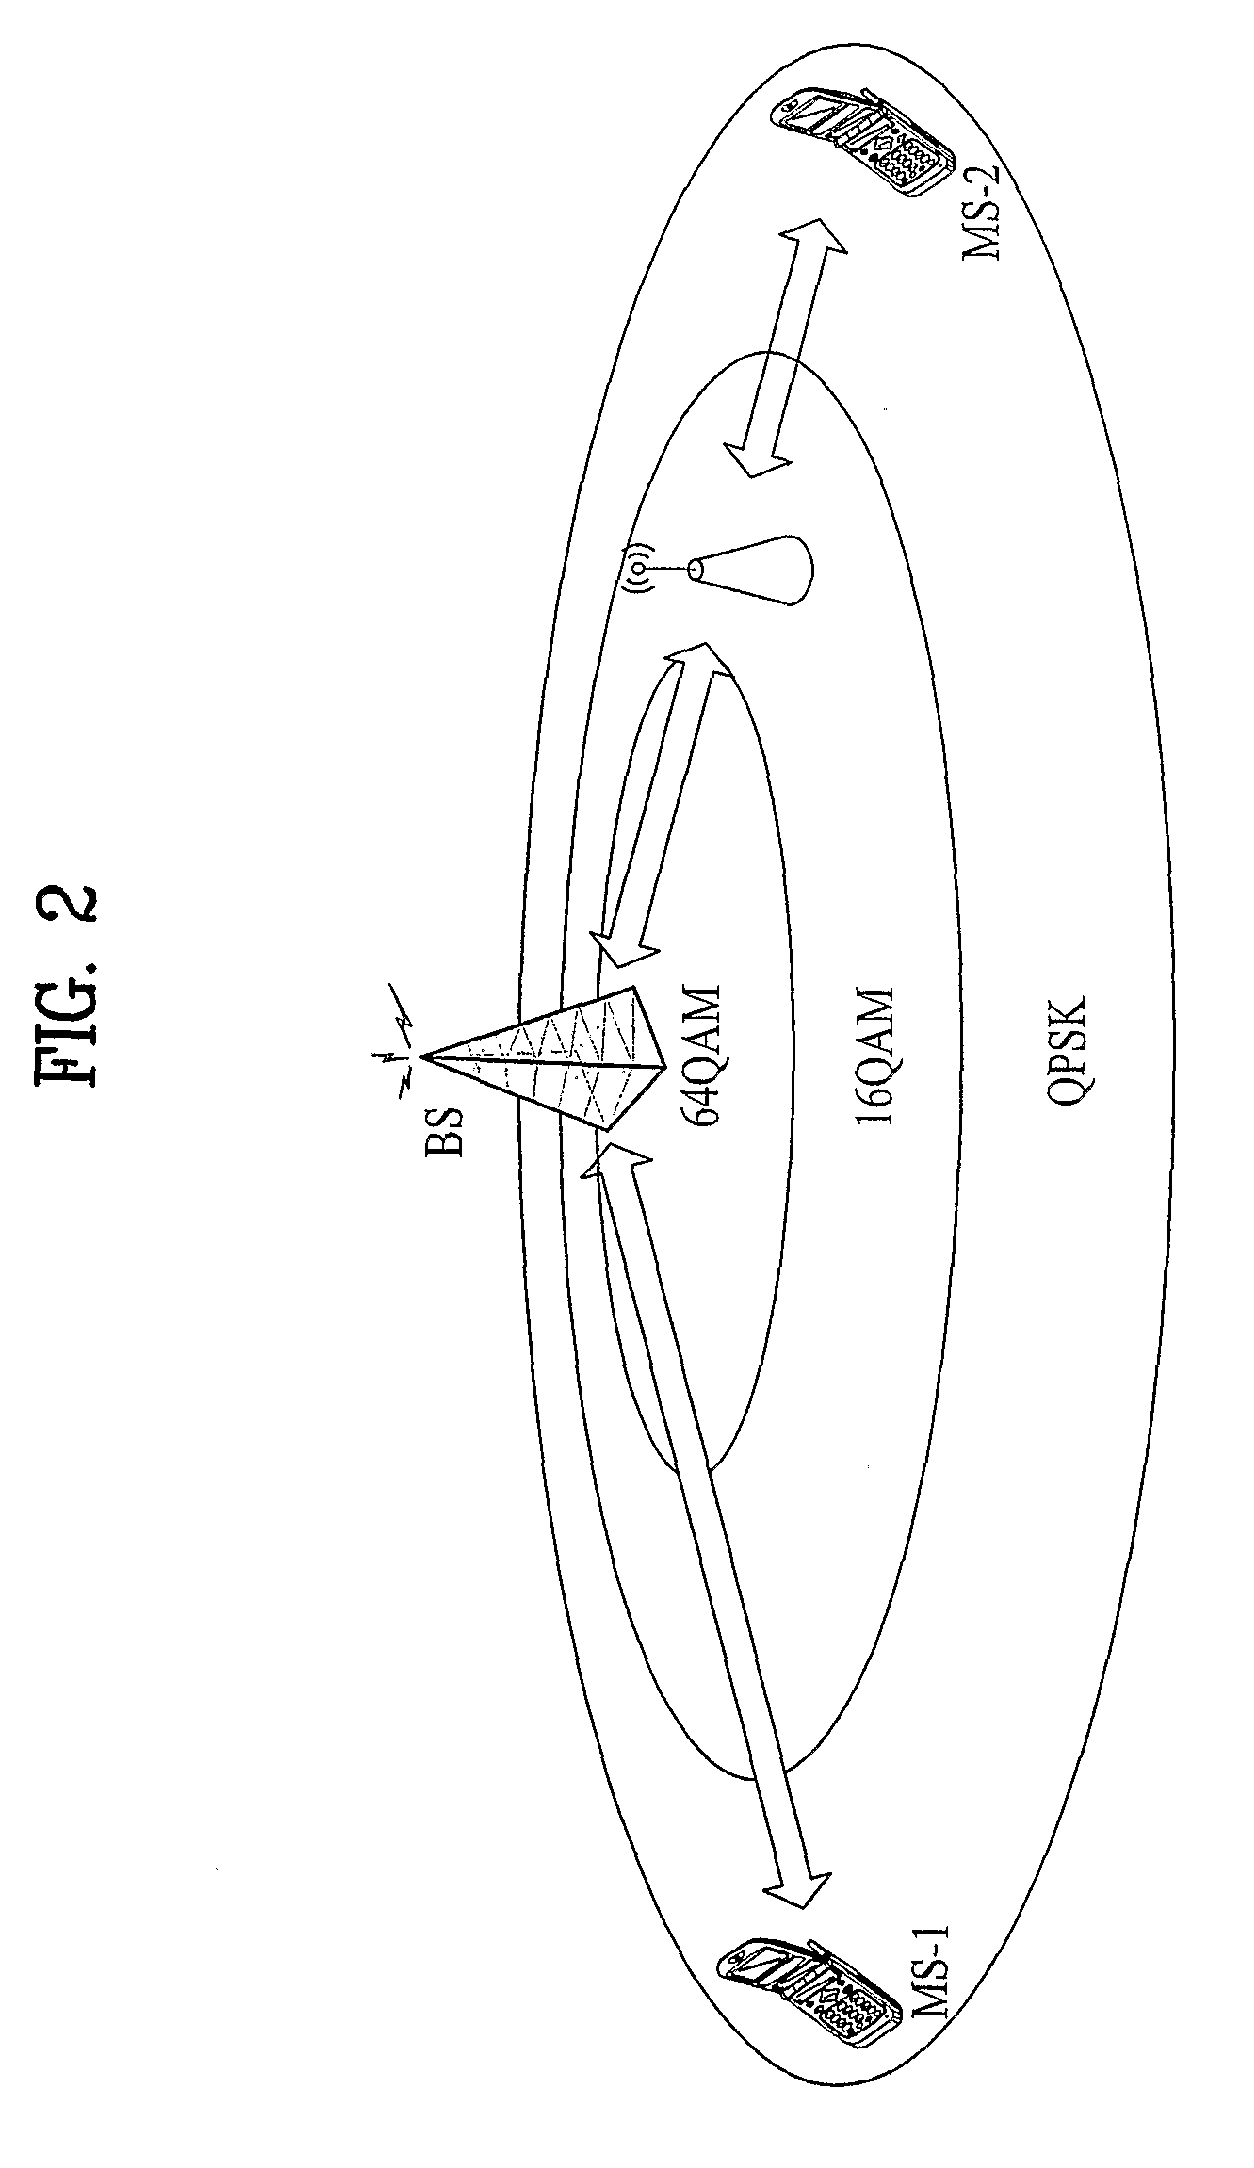 Method of providing security for relay station